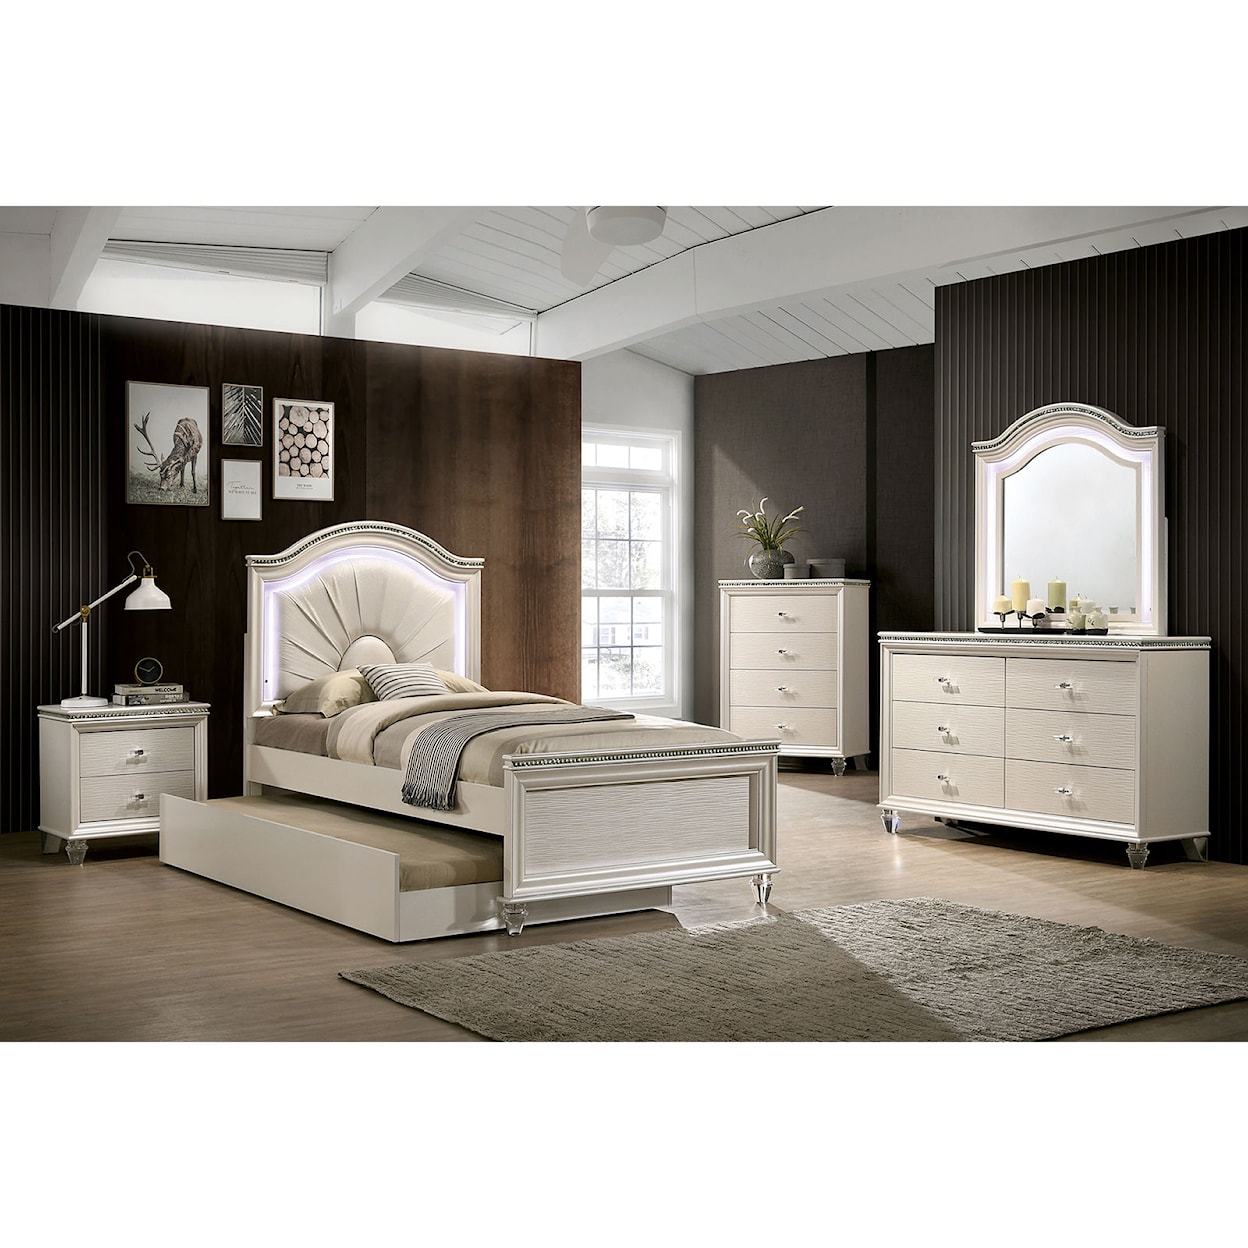 Furniture of America Allie Twin Bedroom Set with Trundle